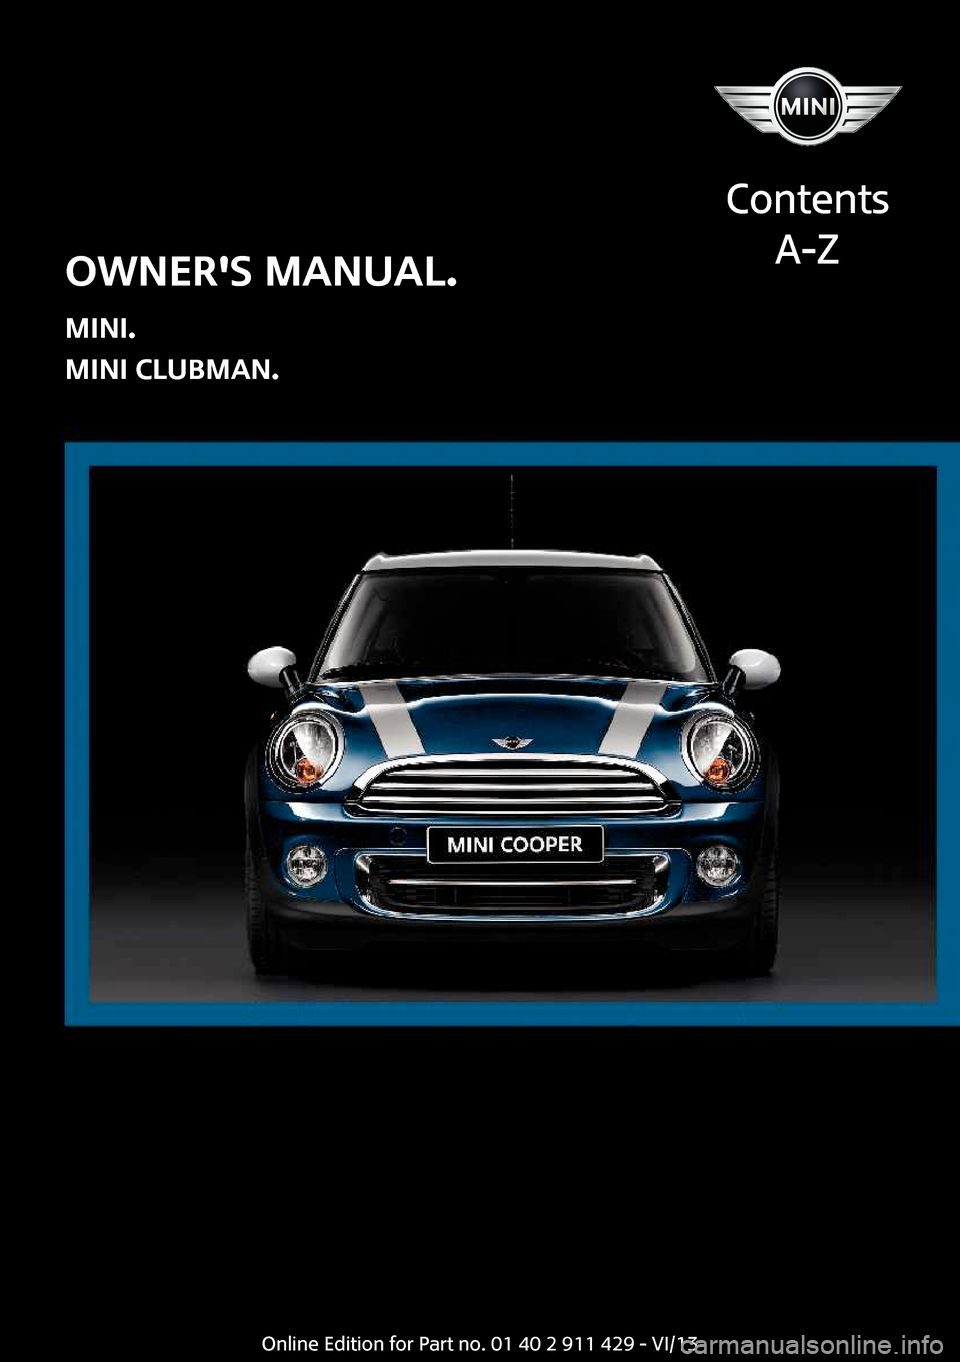 MINI Clubman 2014  Owners Manual Owners Manual.
MINI.
MINI Clubman.
Contents
A-ZOnline Edition for Part no. 01 40 2 911 429 - VI/13  